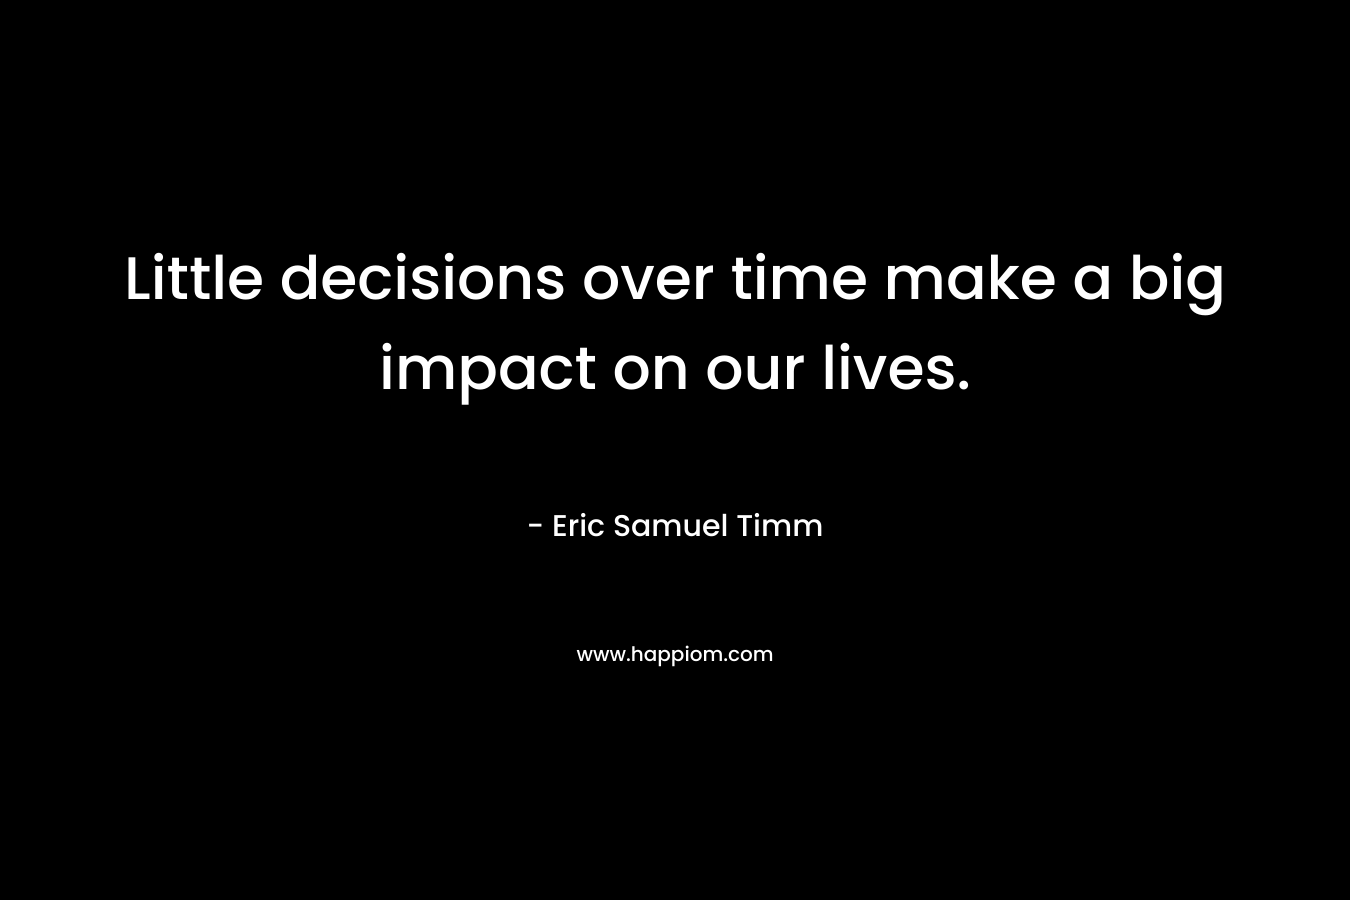 Little decisions over time make a big impact on our lives.